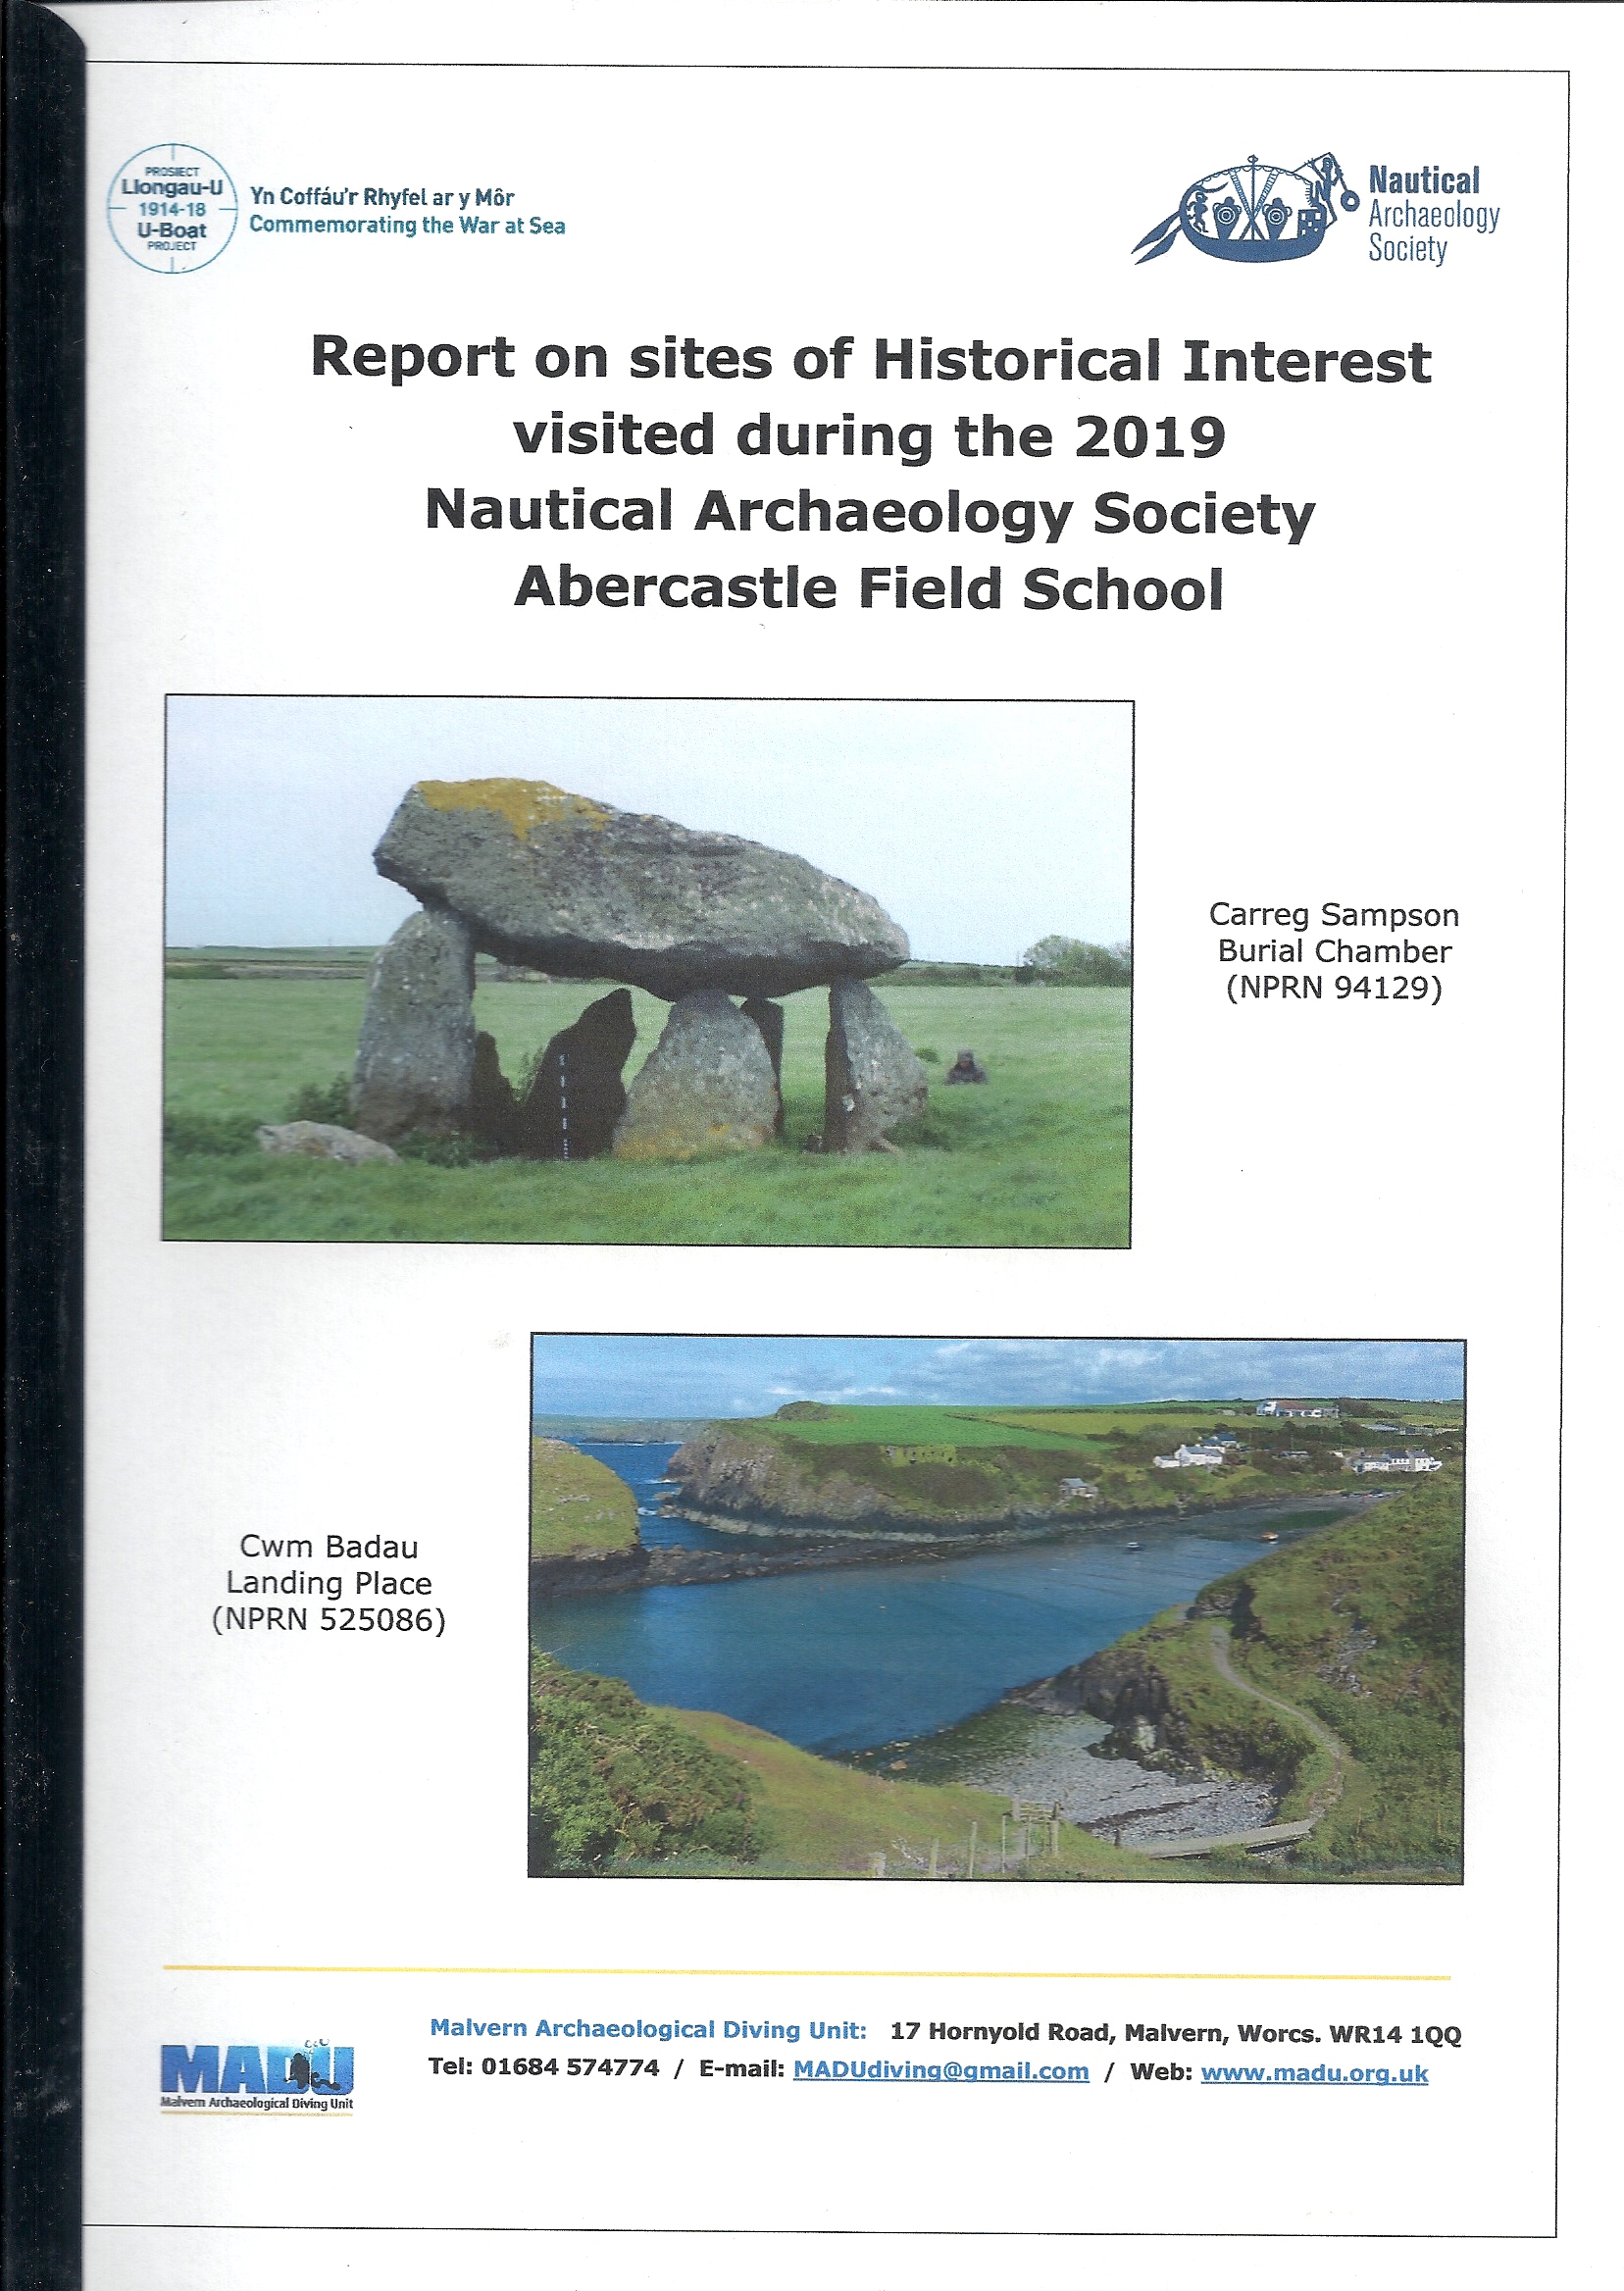 Report on Heritage Sites near Abercastle 